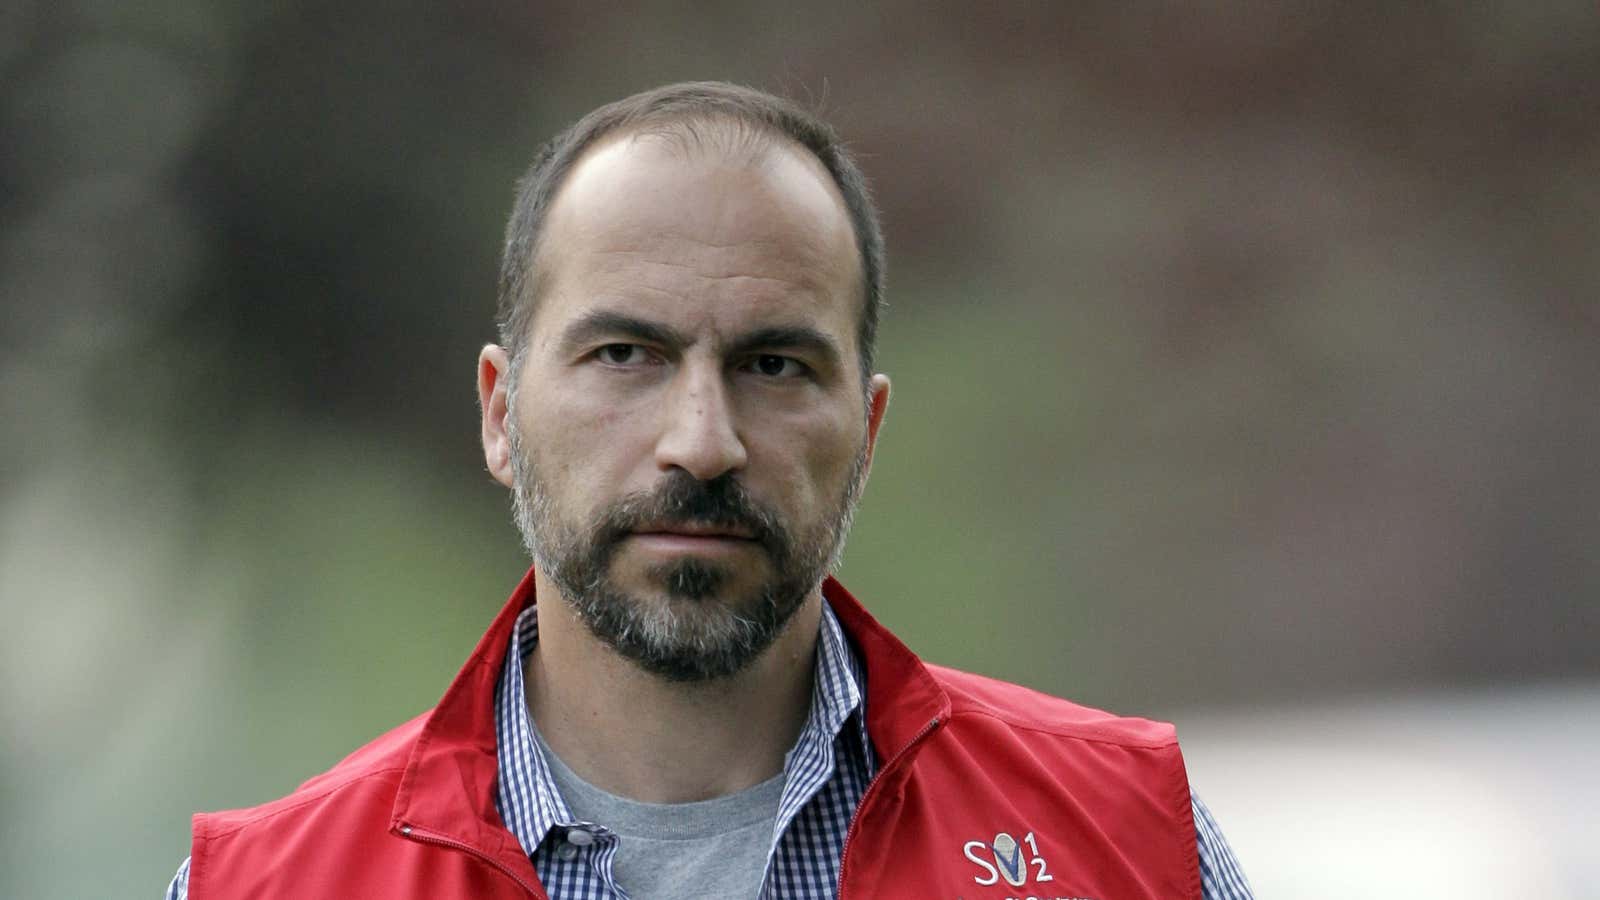 Dara Khosrowshahi was the highest paid CEO in the S&amp;P 500 in 2015.